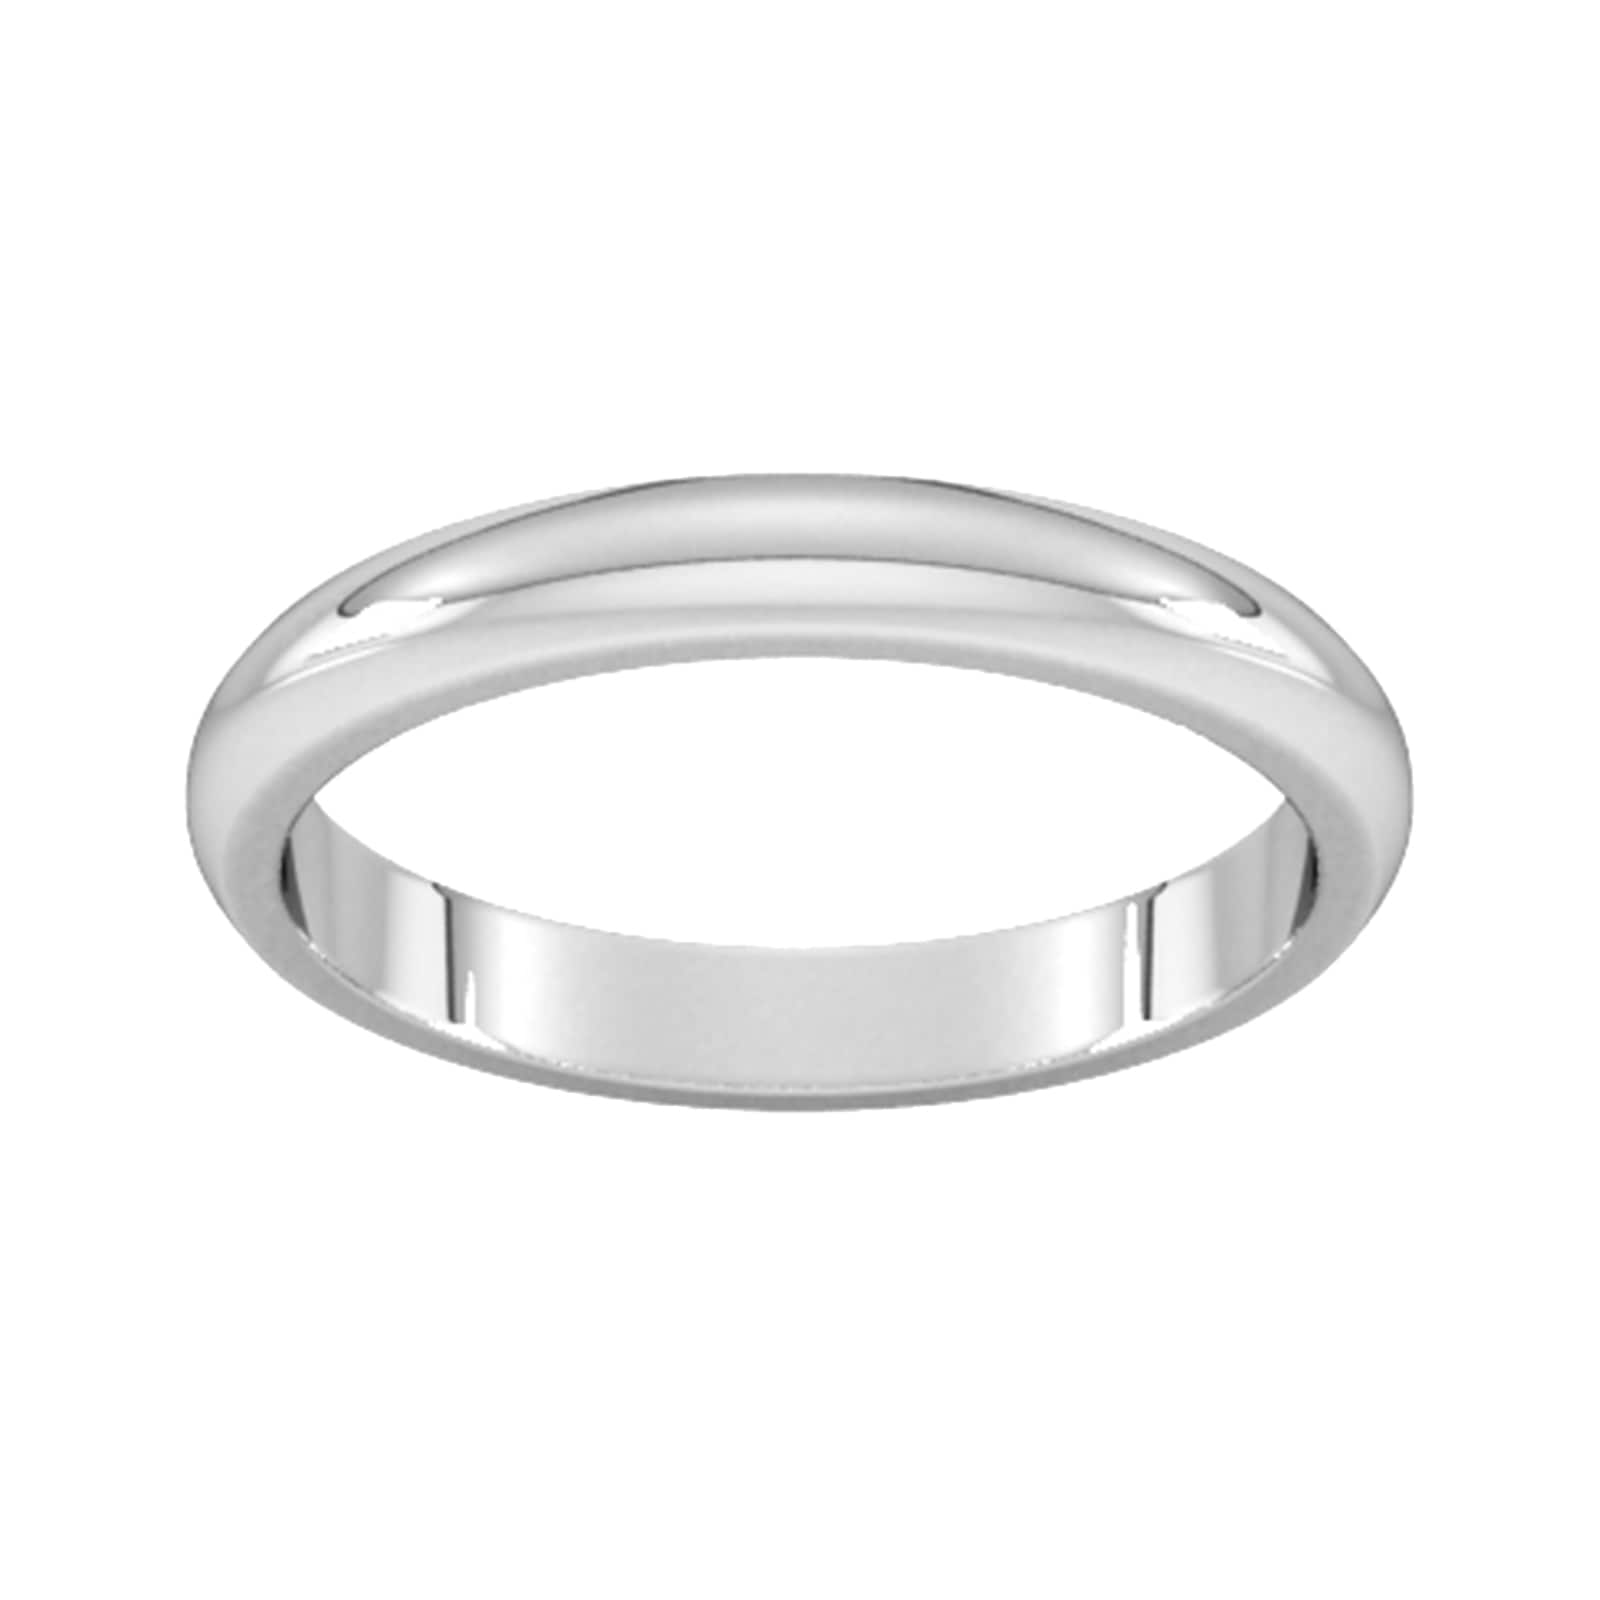 3mm D Shape Heavy Wedding Ring In 9 Carat White Gold - Ring Size U